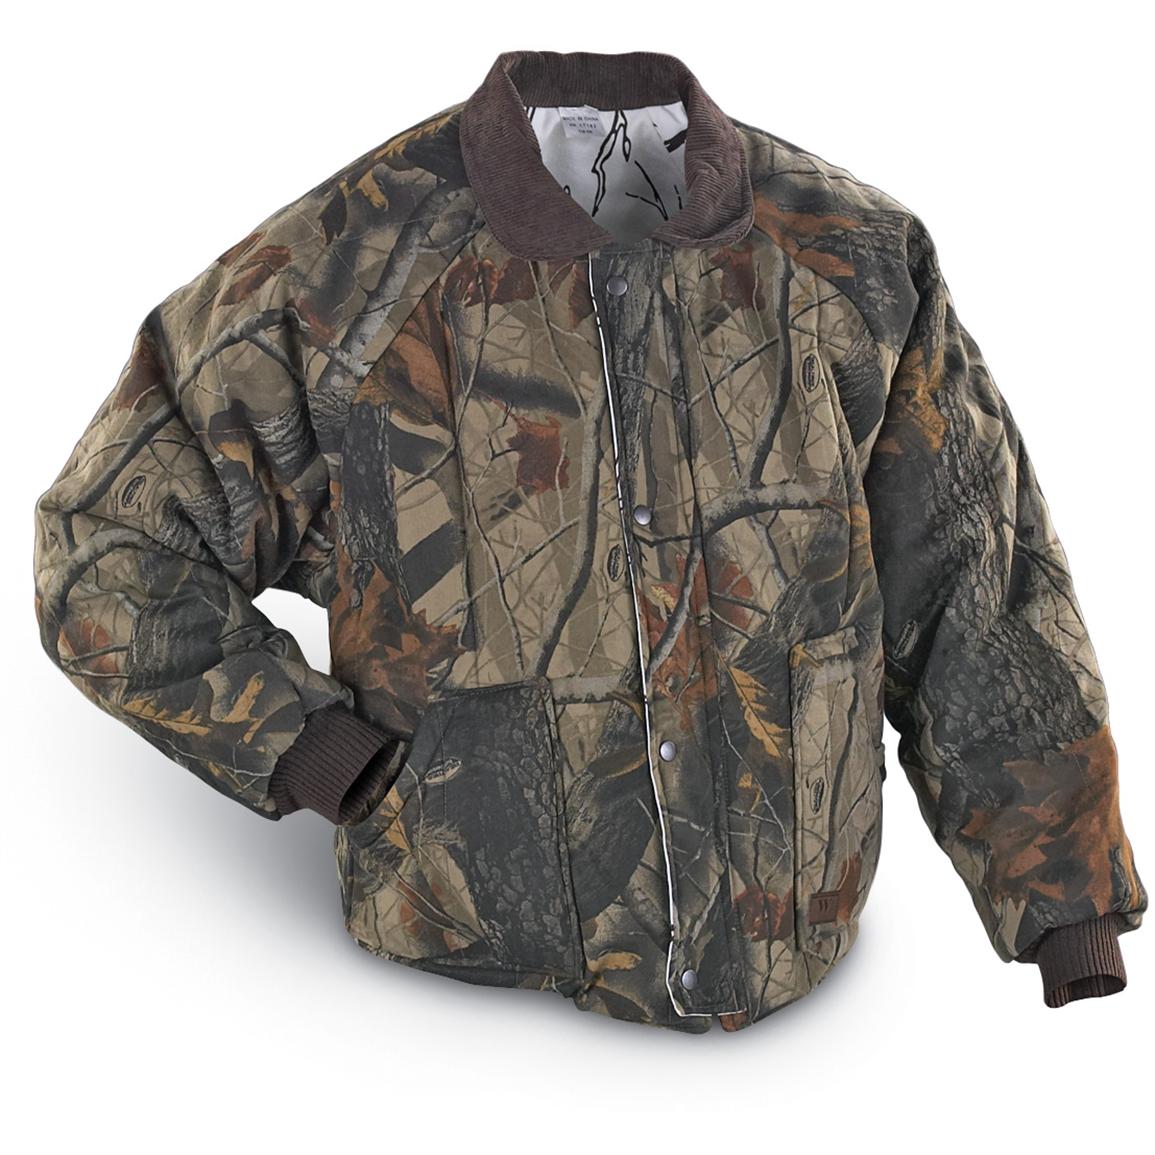 Walls® Reversible Insulated Jacket, Hardwoods® / Snow Camo 110763, Camo Jackets at Sportsman's